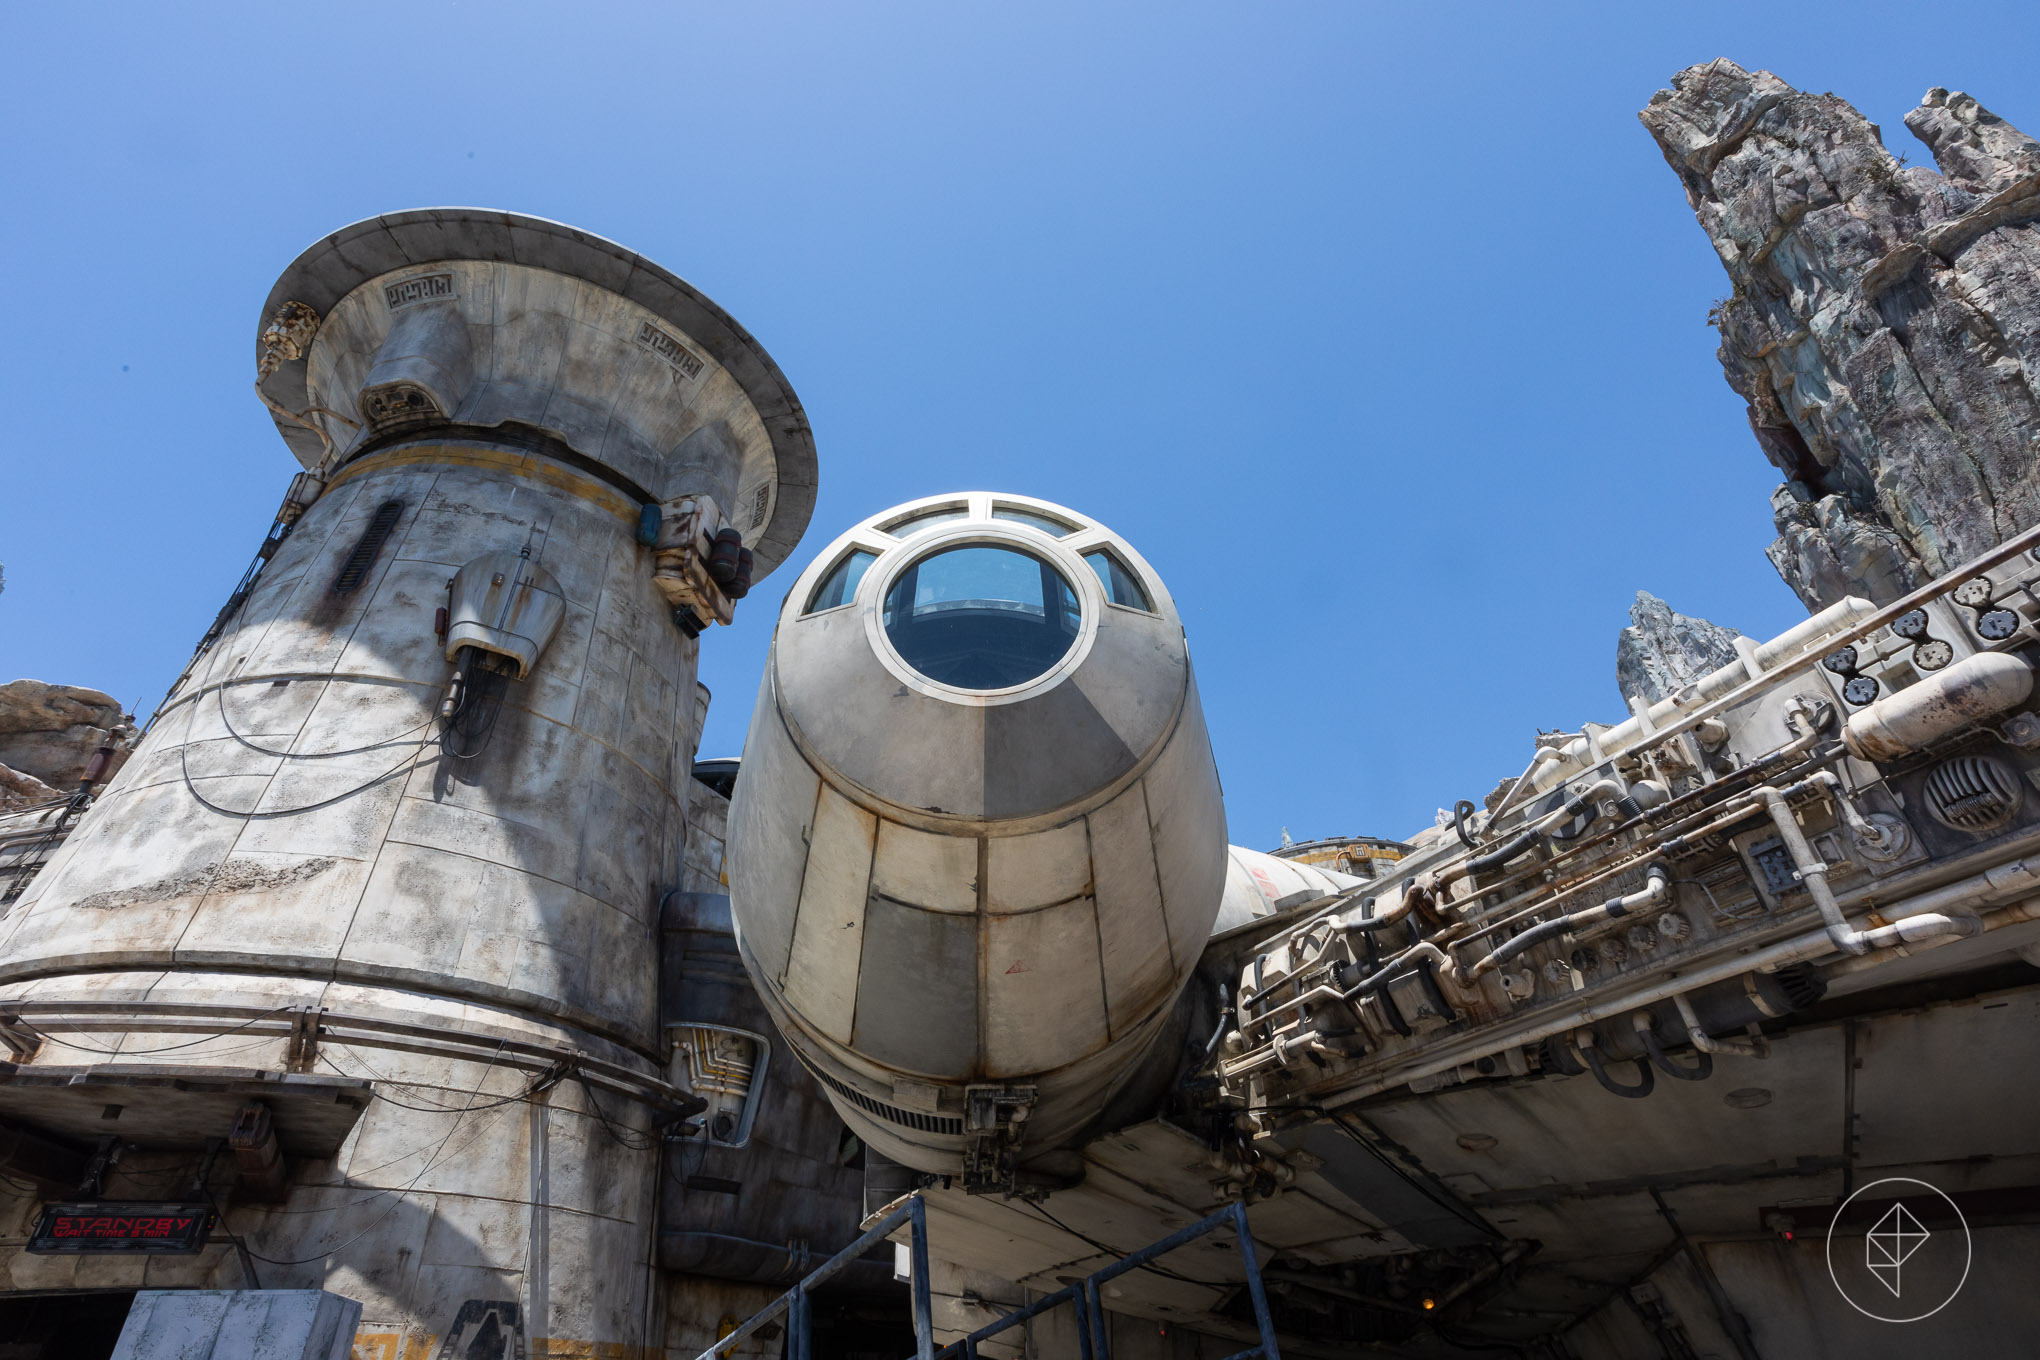 Close up of the full size Millennium Falcon in Galaxy’s Edge, Disneyland 